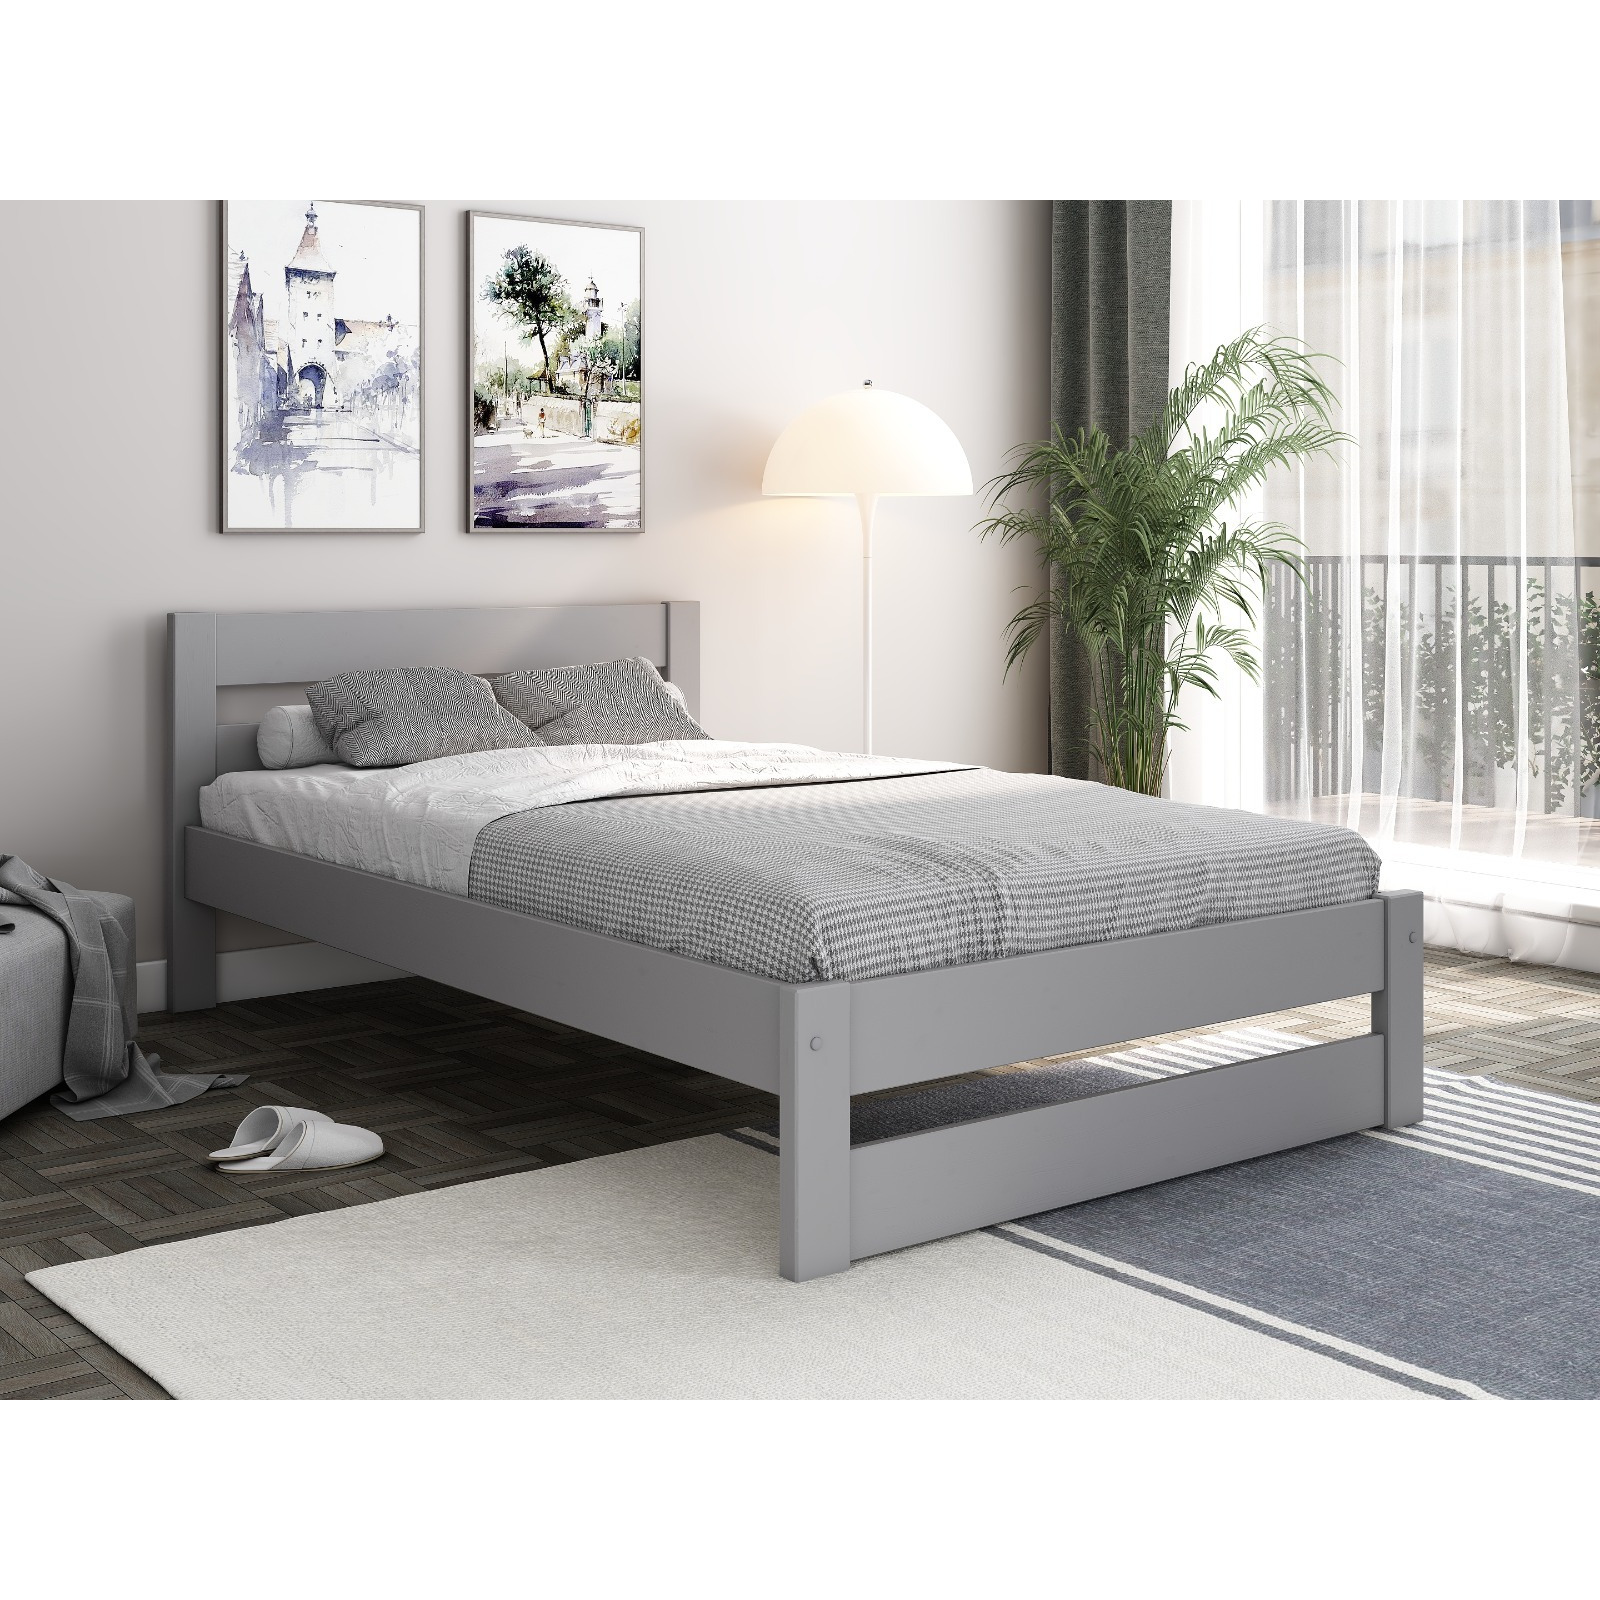 Noomi Tera Solid Wood Small Double Bed (FSC-Certified) Grey - image 1